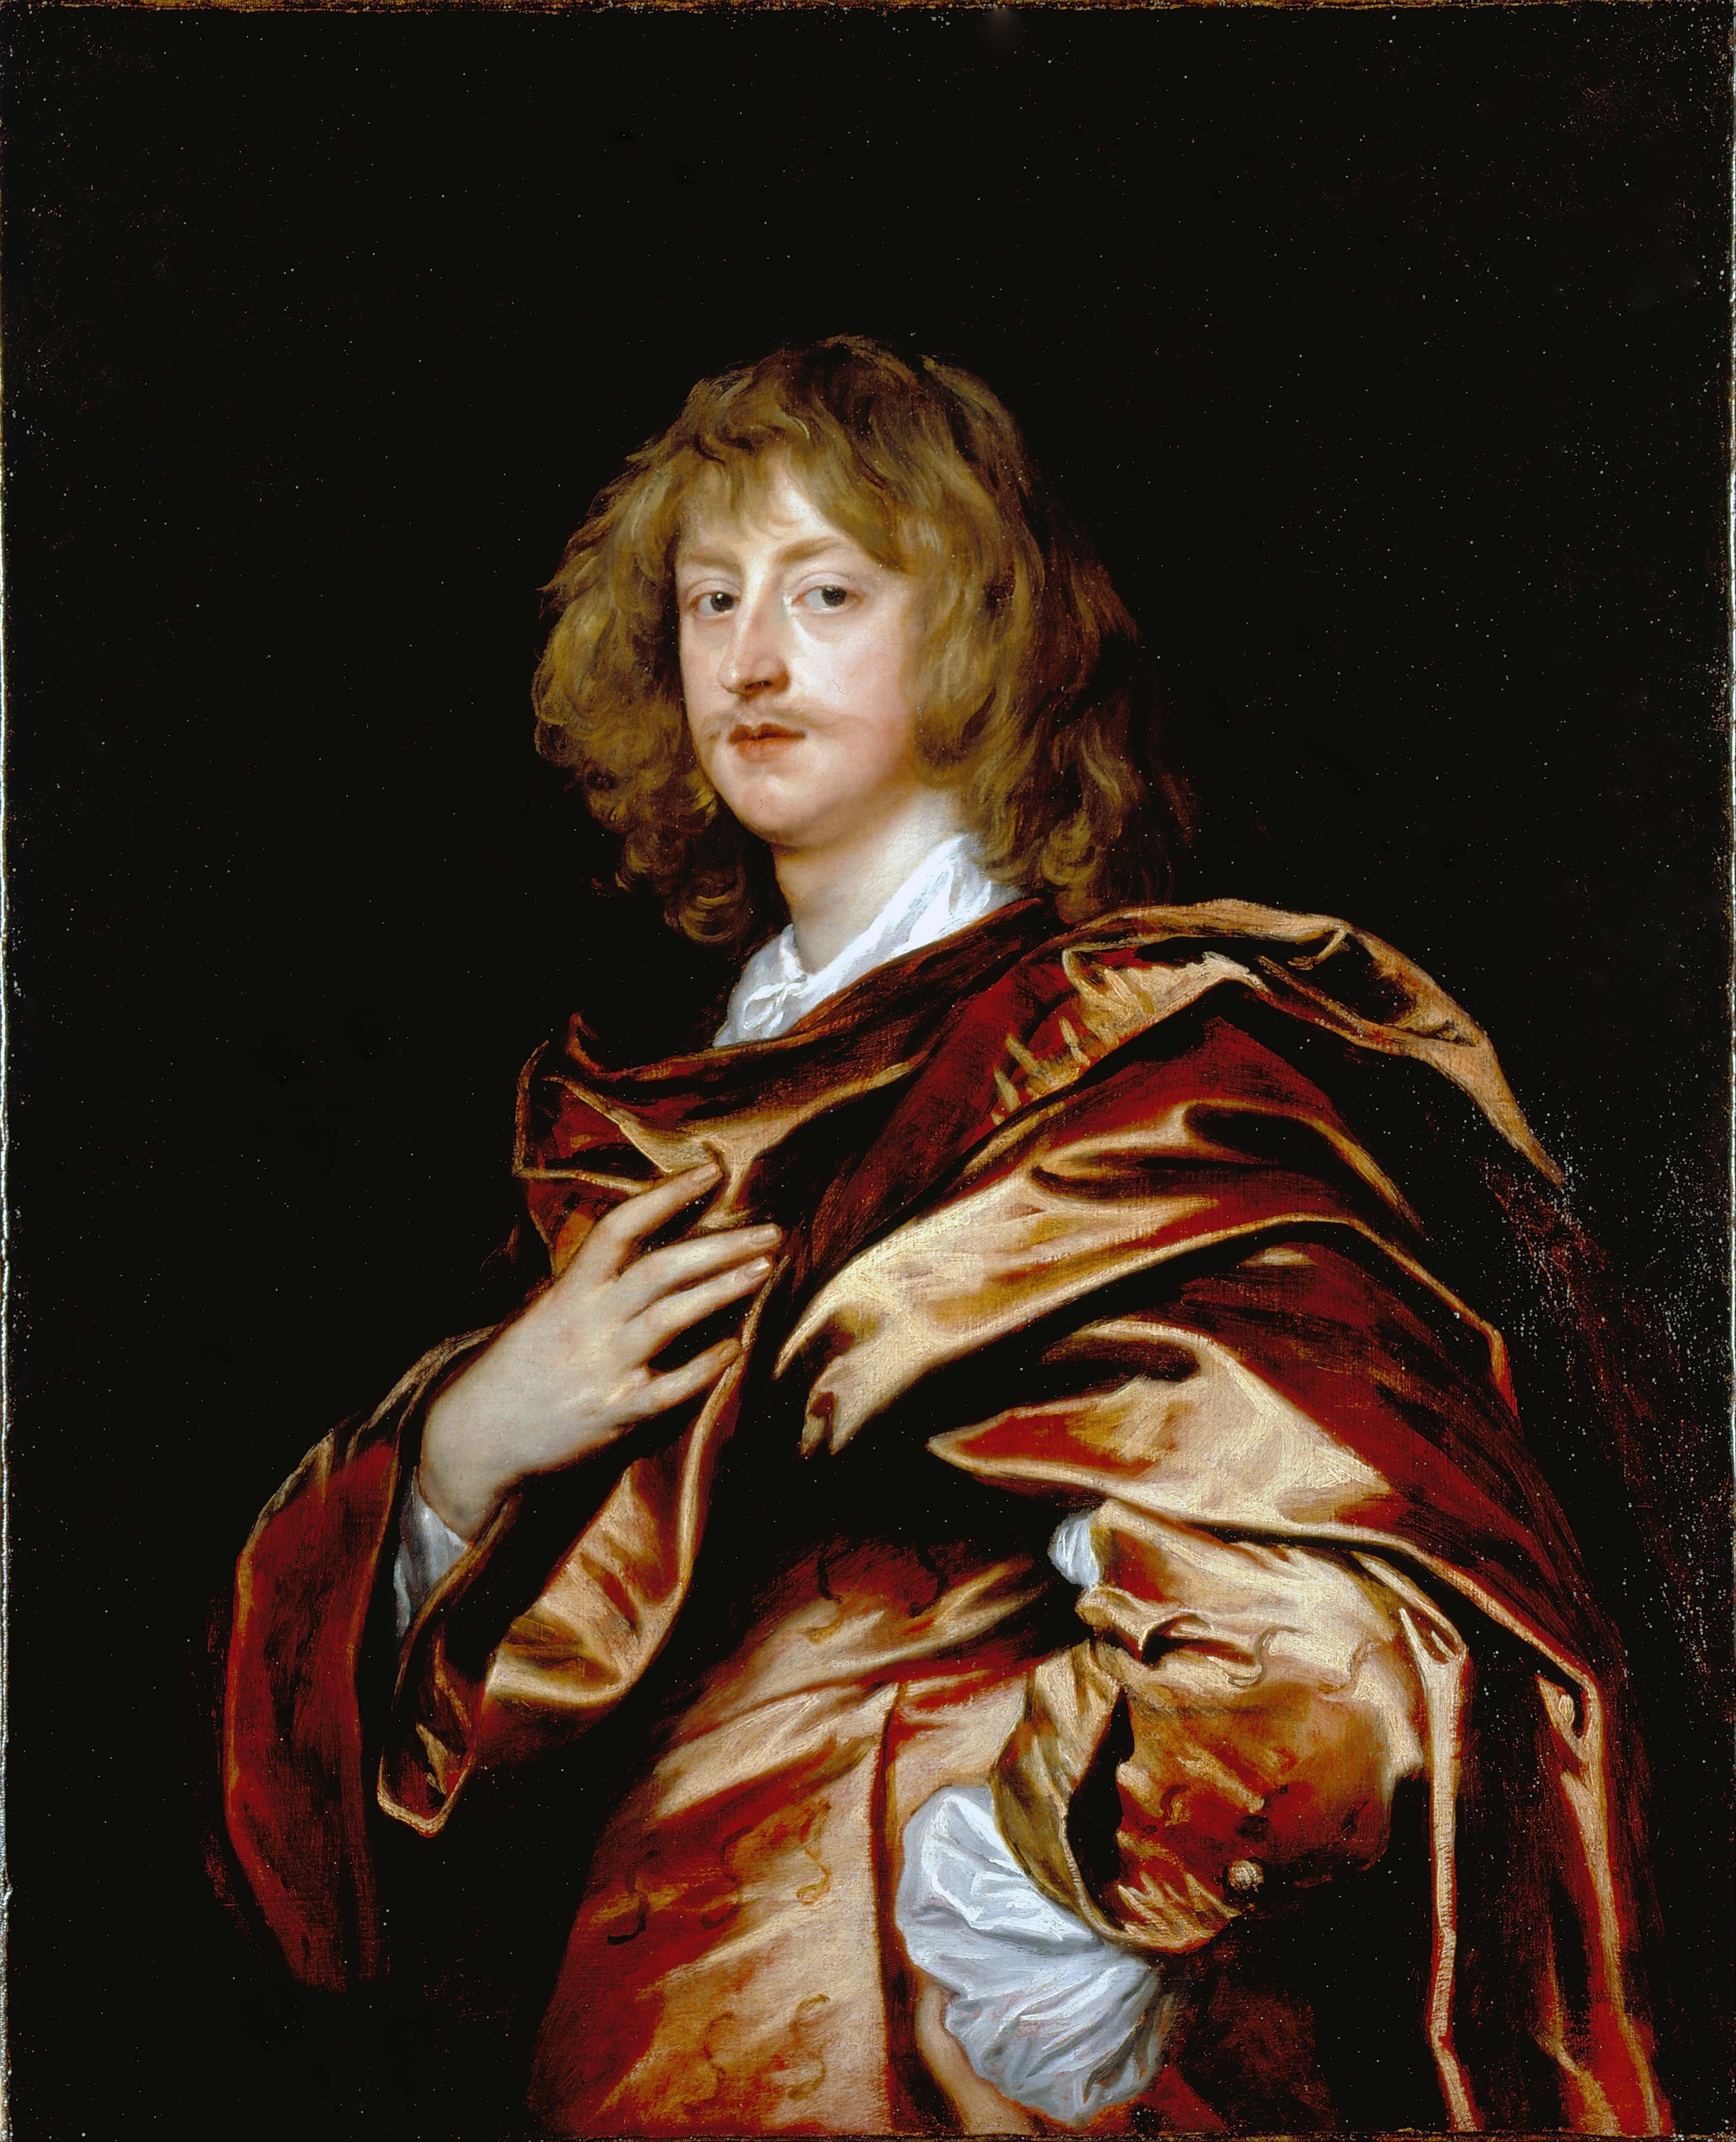 George Digby, 2. Earl of Bristol by Anthonis van Dyck - ca.1638 - 103.2 x 83.2 cm Dulwich Picture Gallery